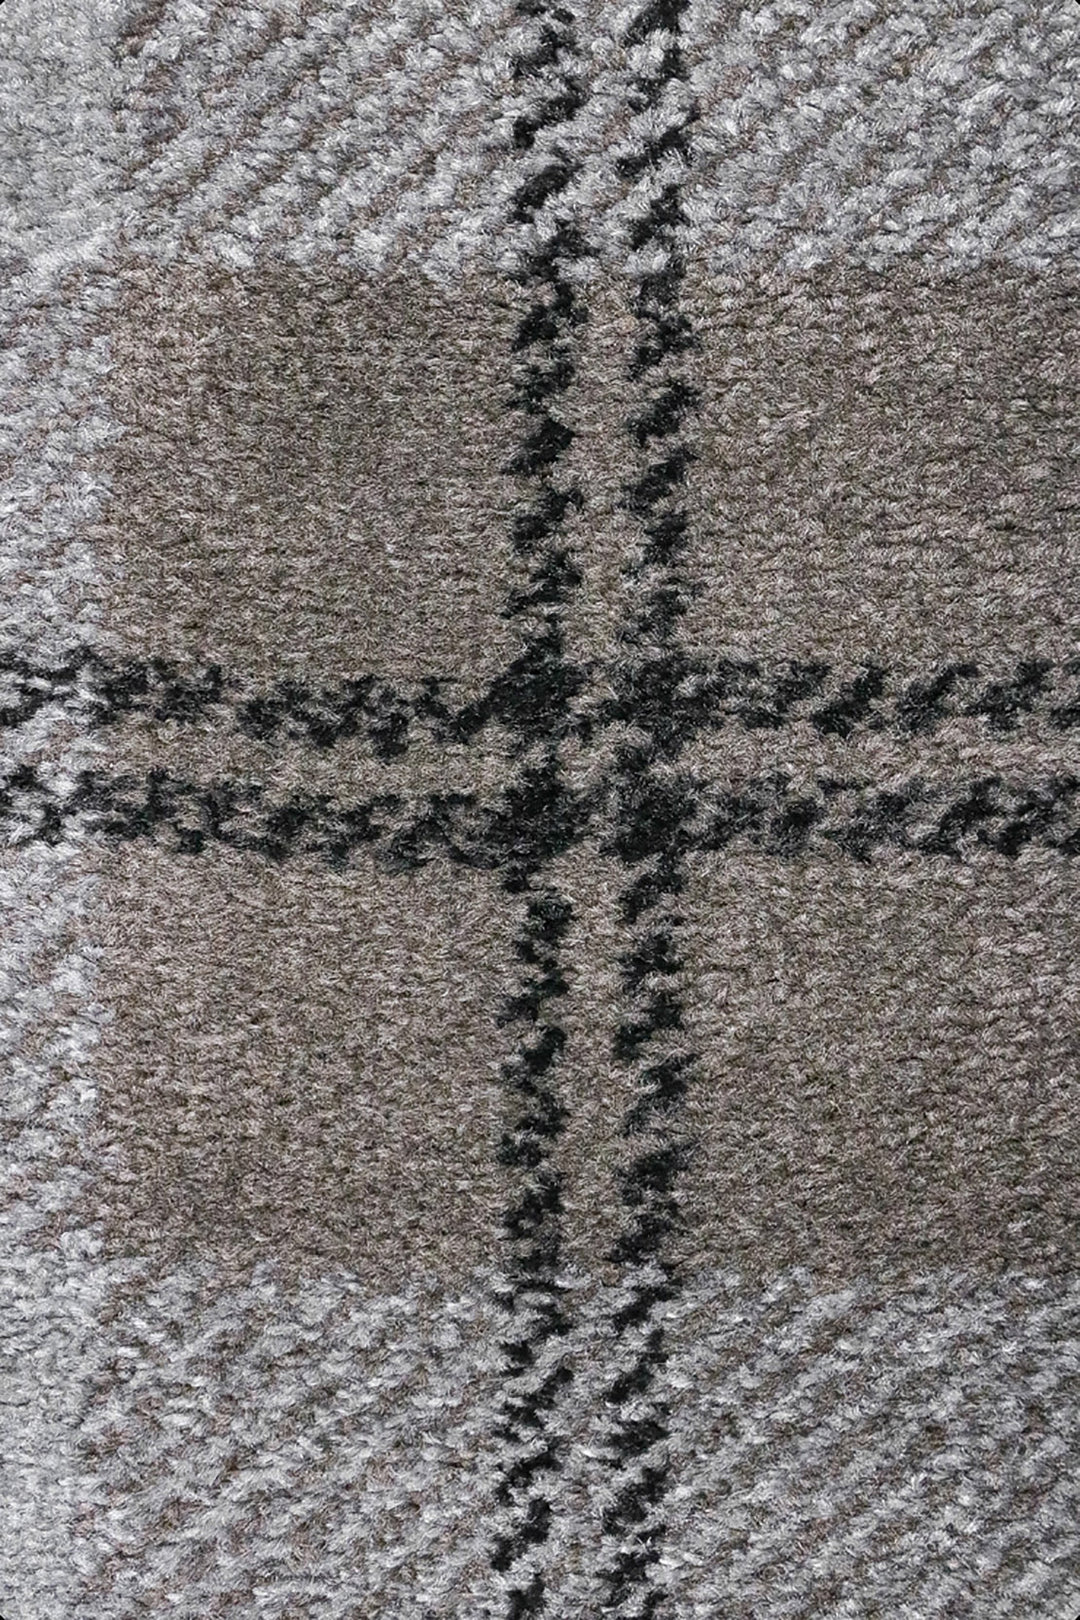 Turkish Modern Festival WD Rug - 6.6 x 9.5 FT - Gray - Sleek and Minimalist for Chic Interiors